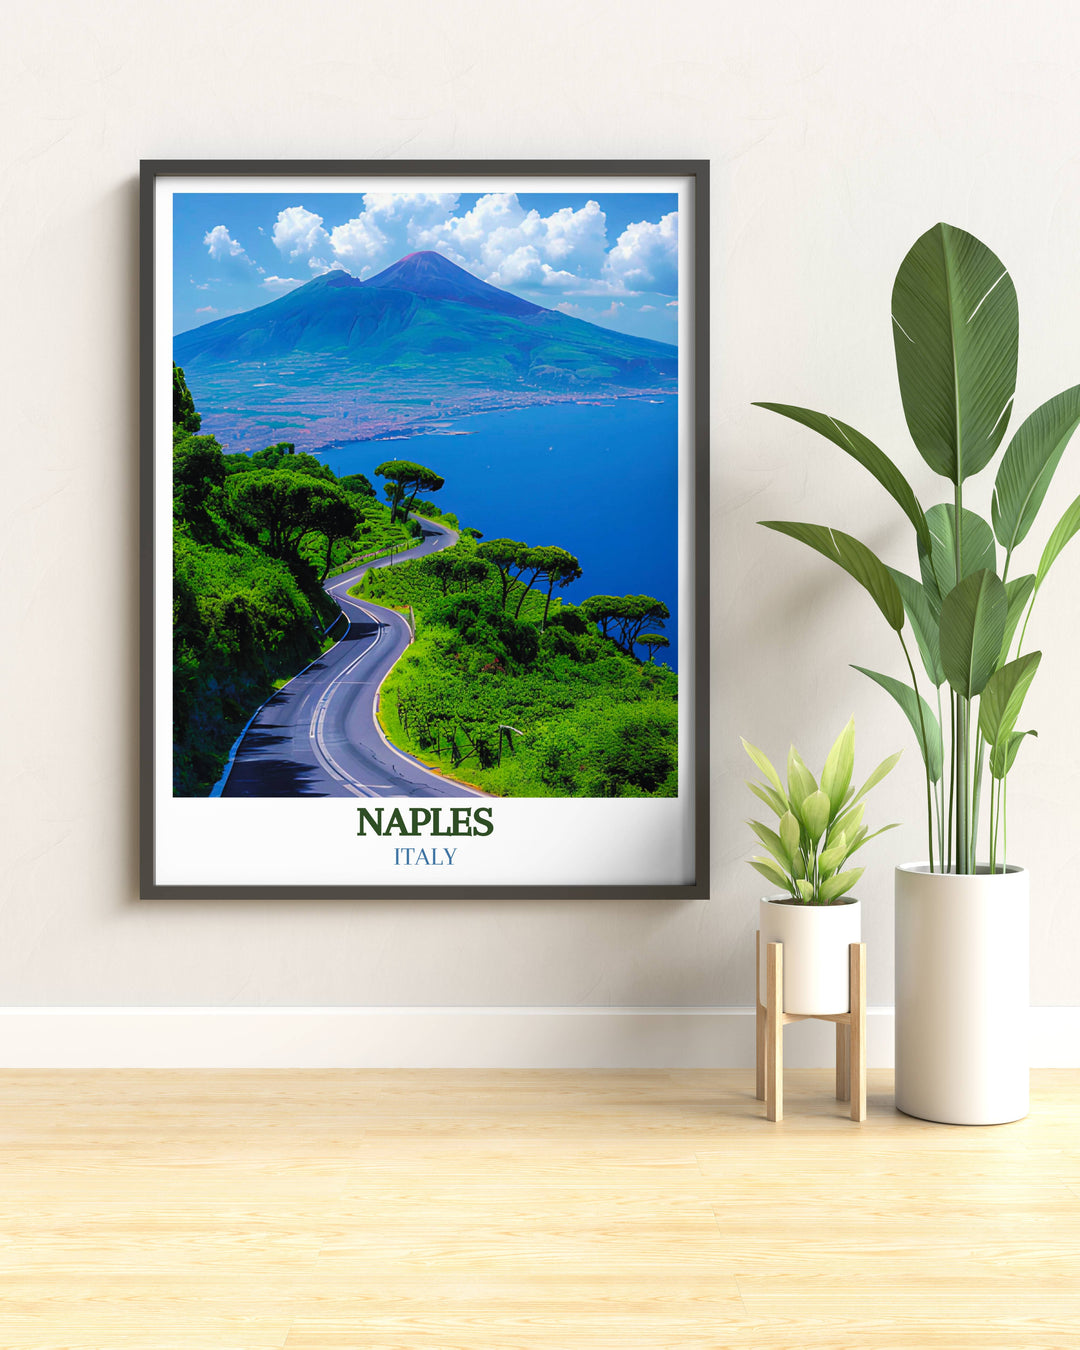 Naples Florida city print showcasing detailed street views and urban beauty perfect for modern wall decor.